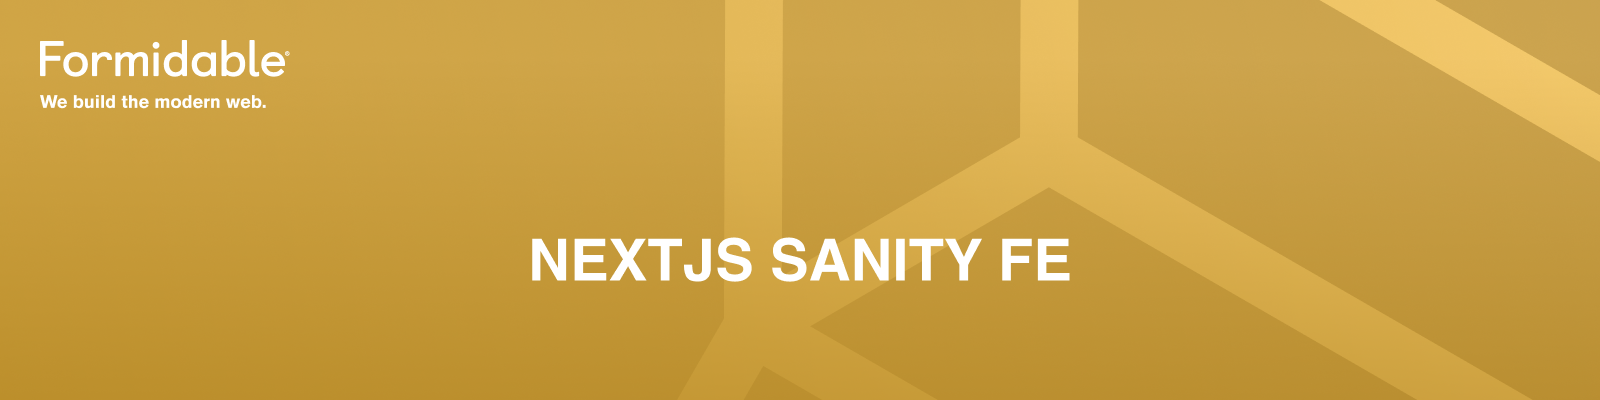 E-Commerce – powered by Next.js + Sanity CMS + Fastly — Formidable, We build the modern web